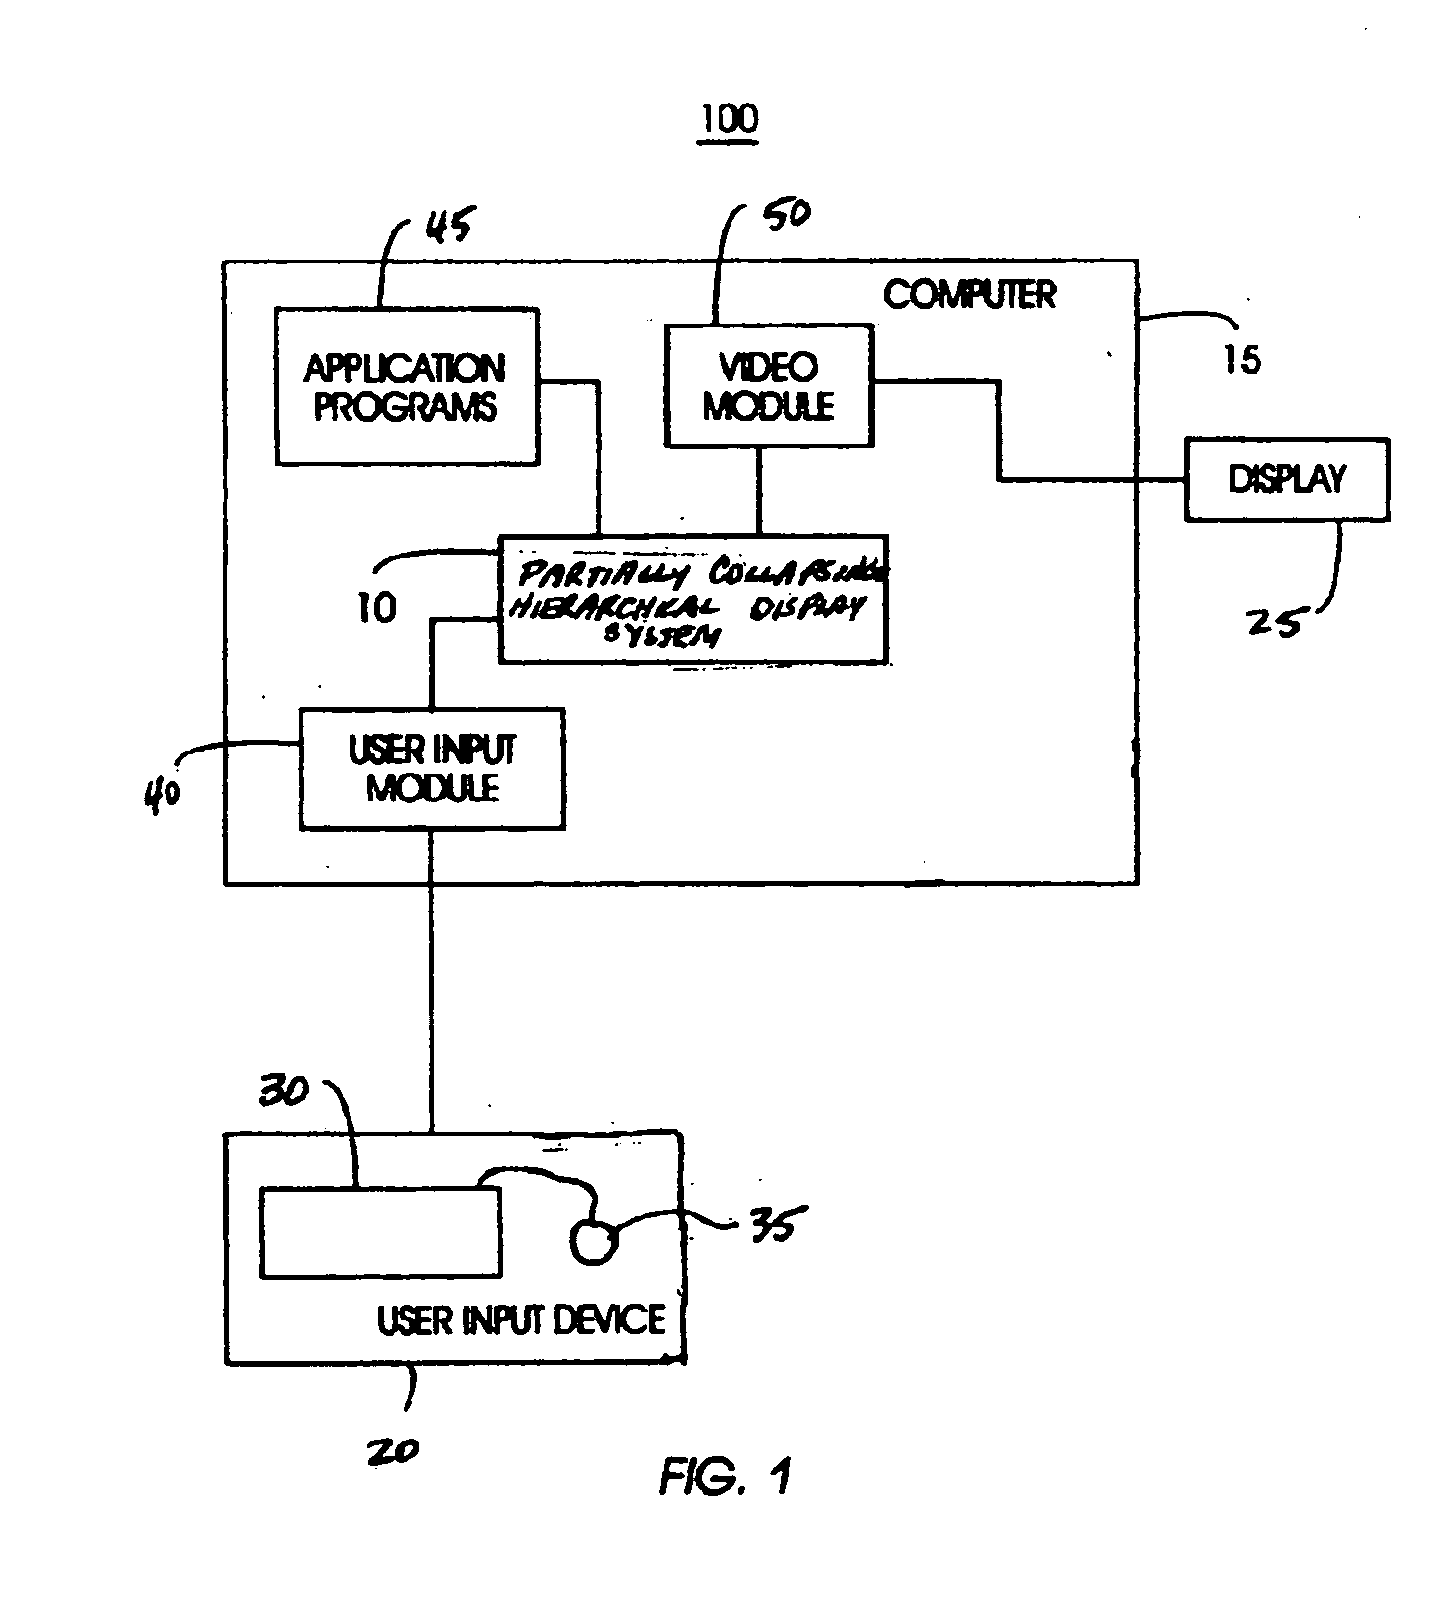 System and method for partially collapsing a hierarchical structure for information navigation